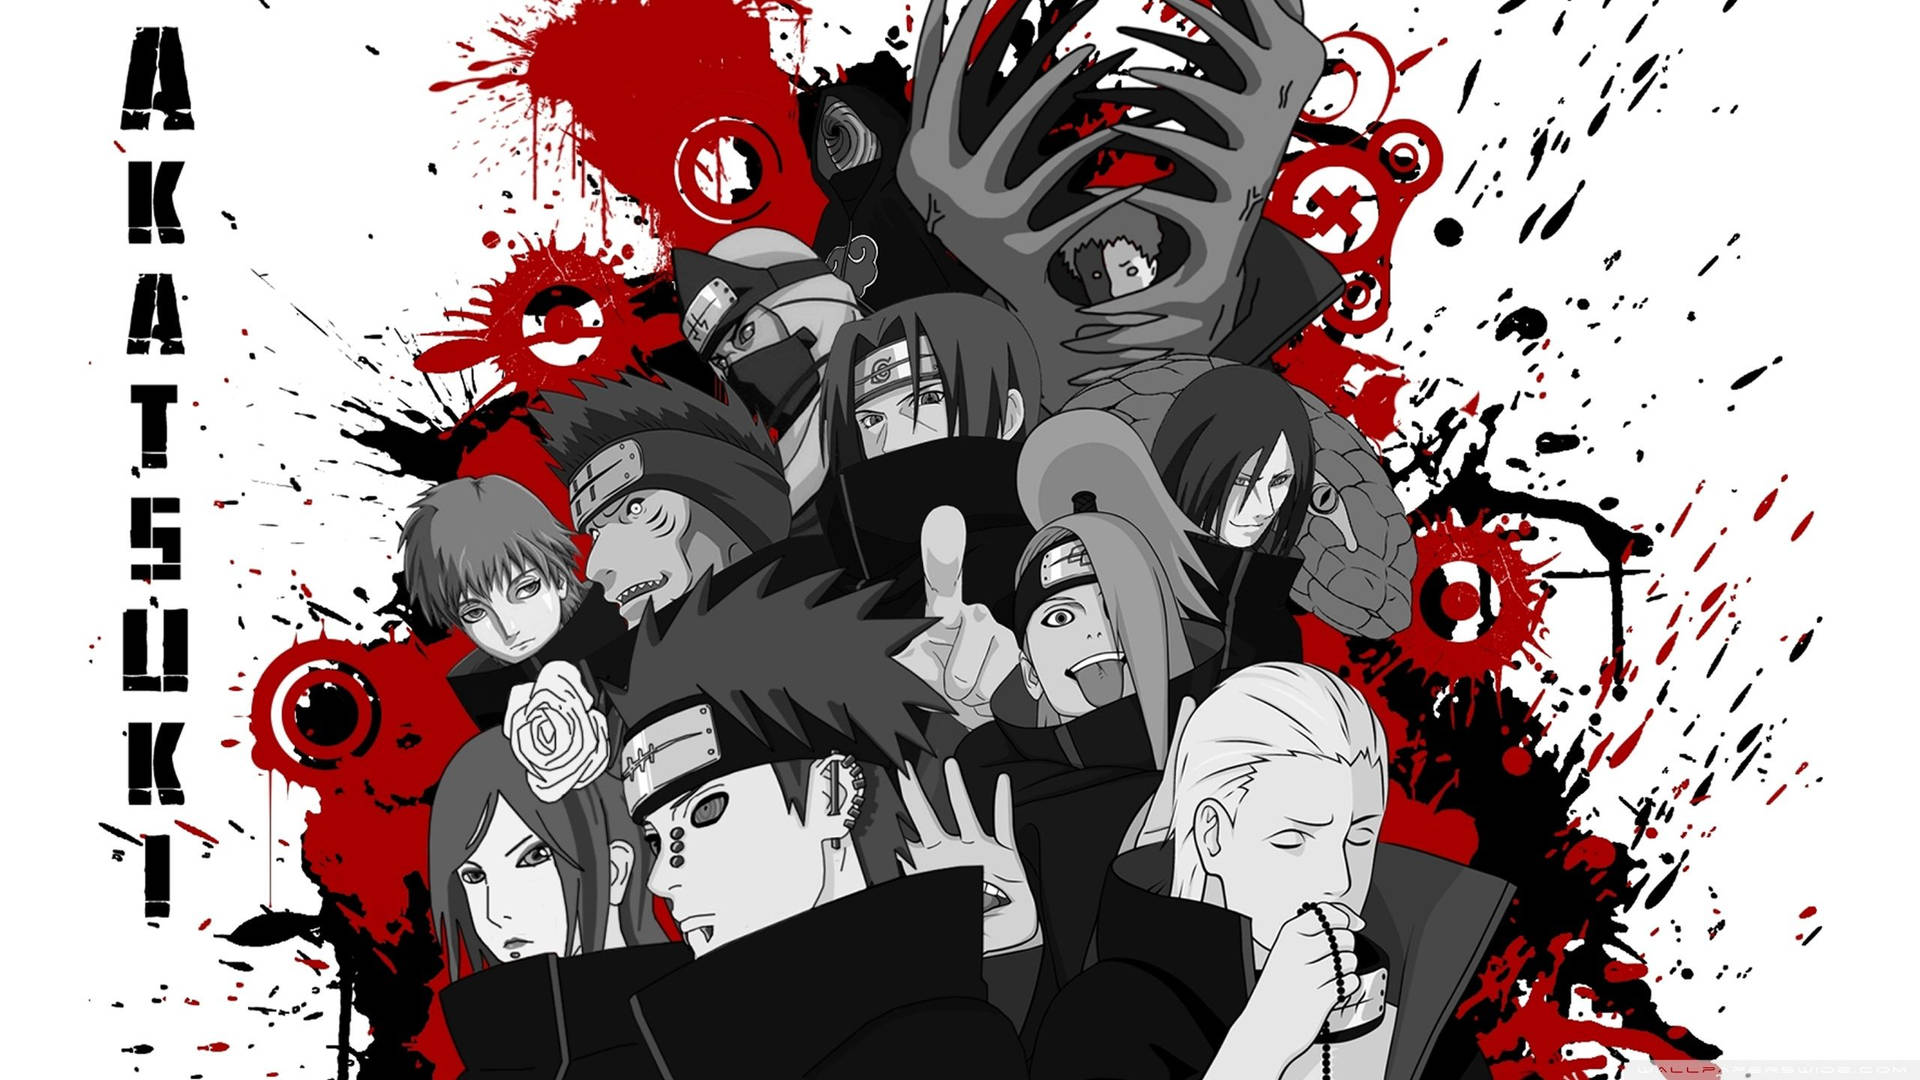 Akatsuki Splattered With Red And Black Background